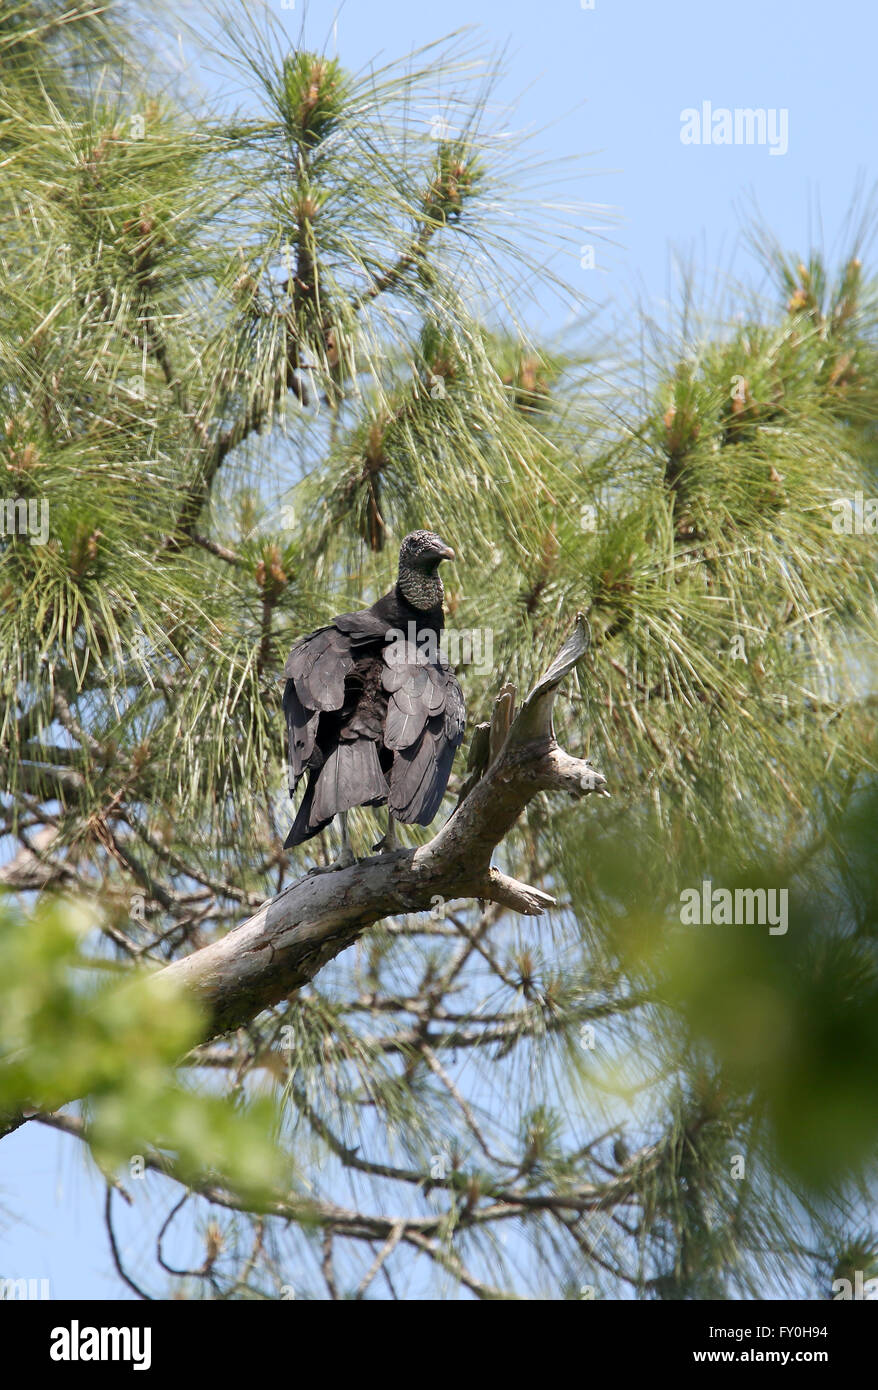 Black Vulture in trees near a residential area in mid Florida, just south of Orlando.  19th April 2016 Stock Photo